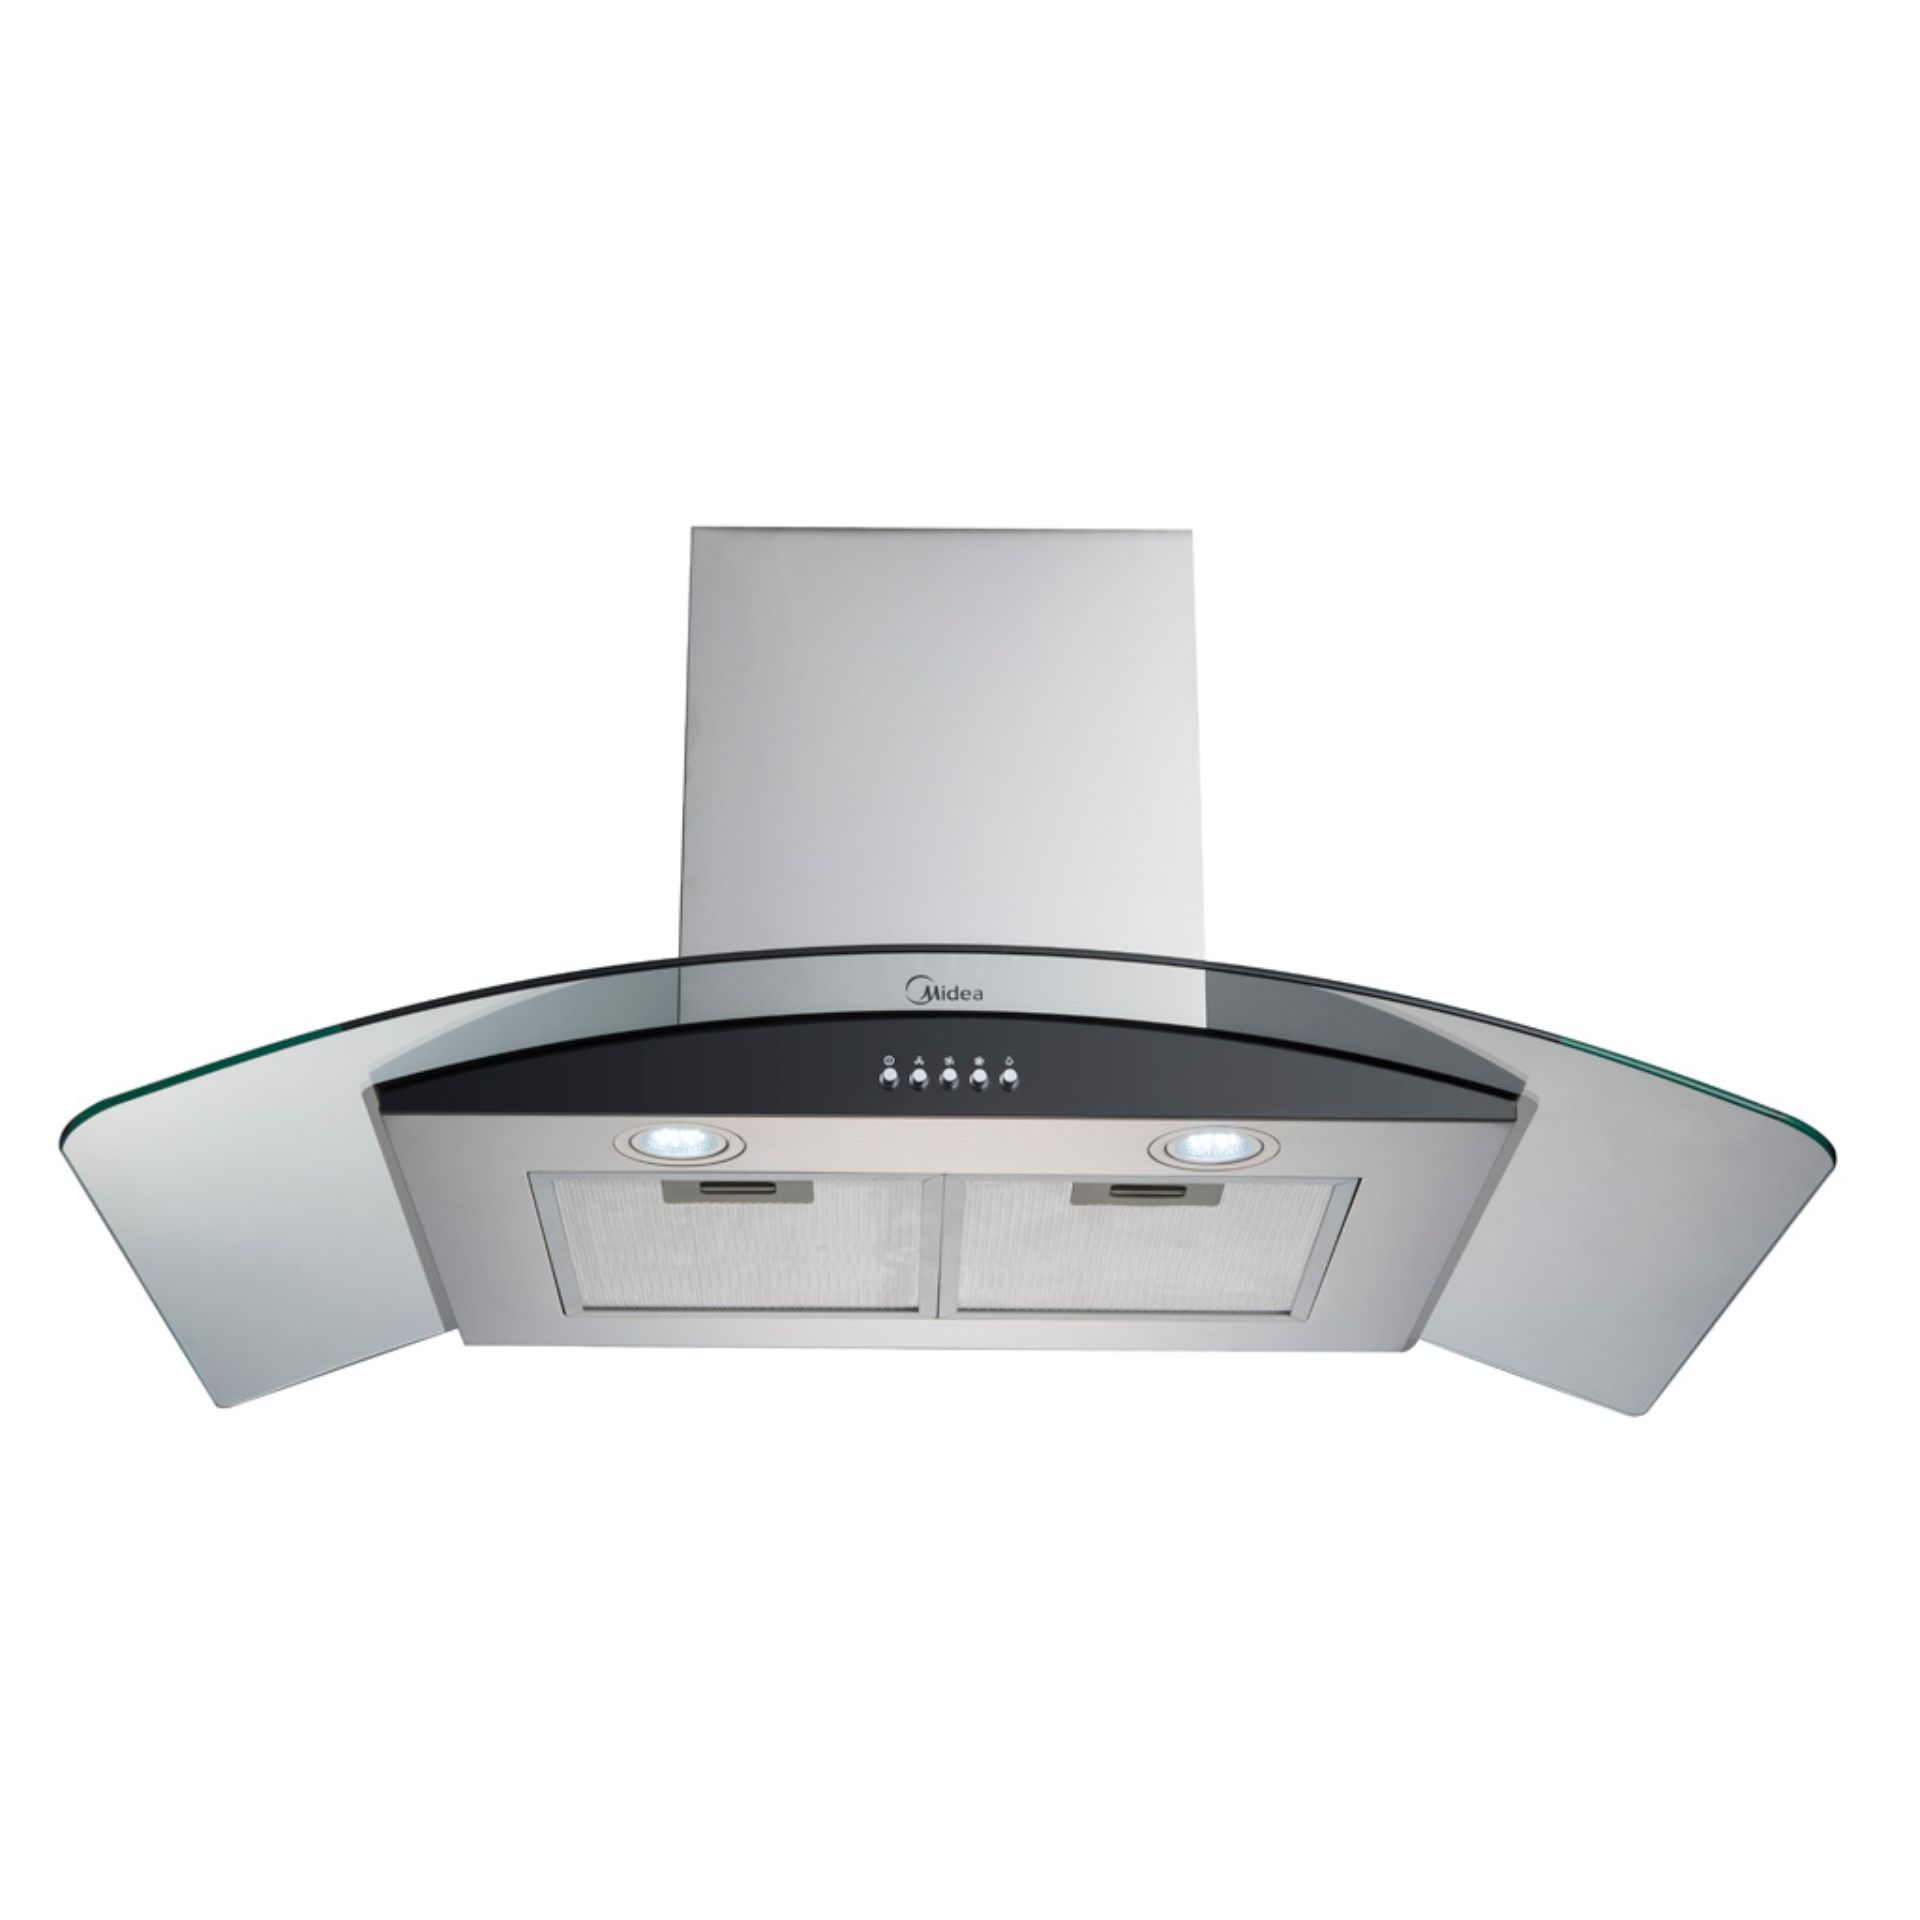 1200m3/hr Cooker Hood with Charcoal Filter - MCH-90MV3